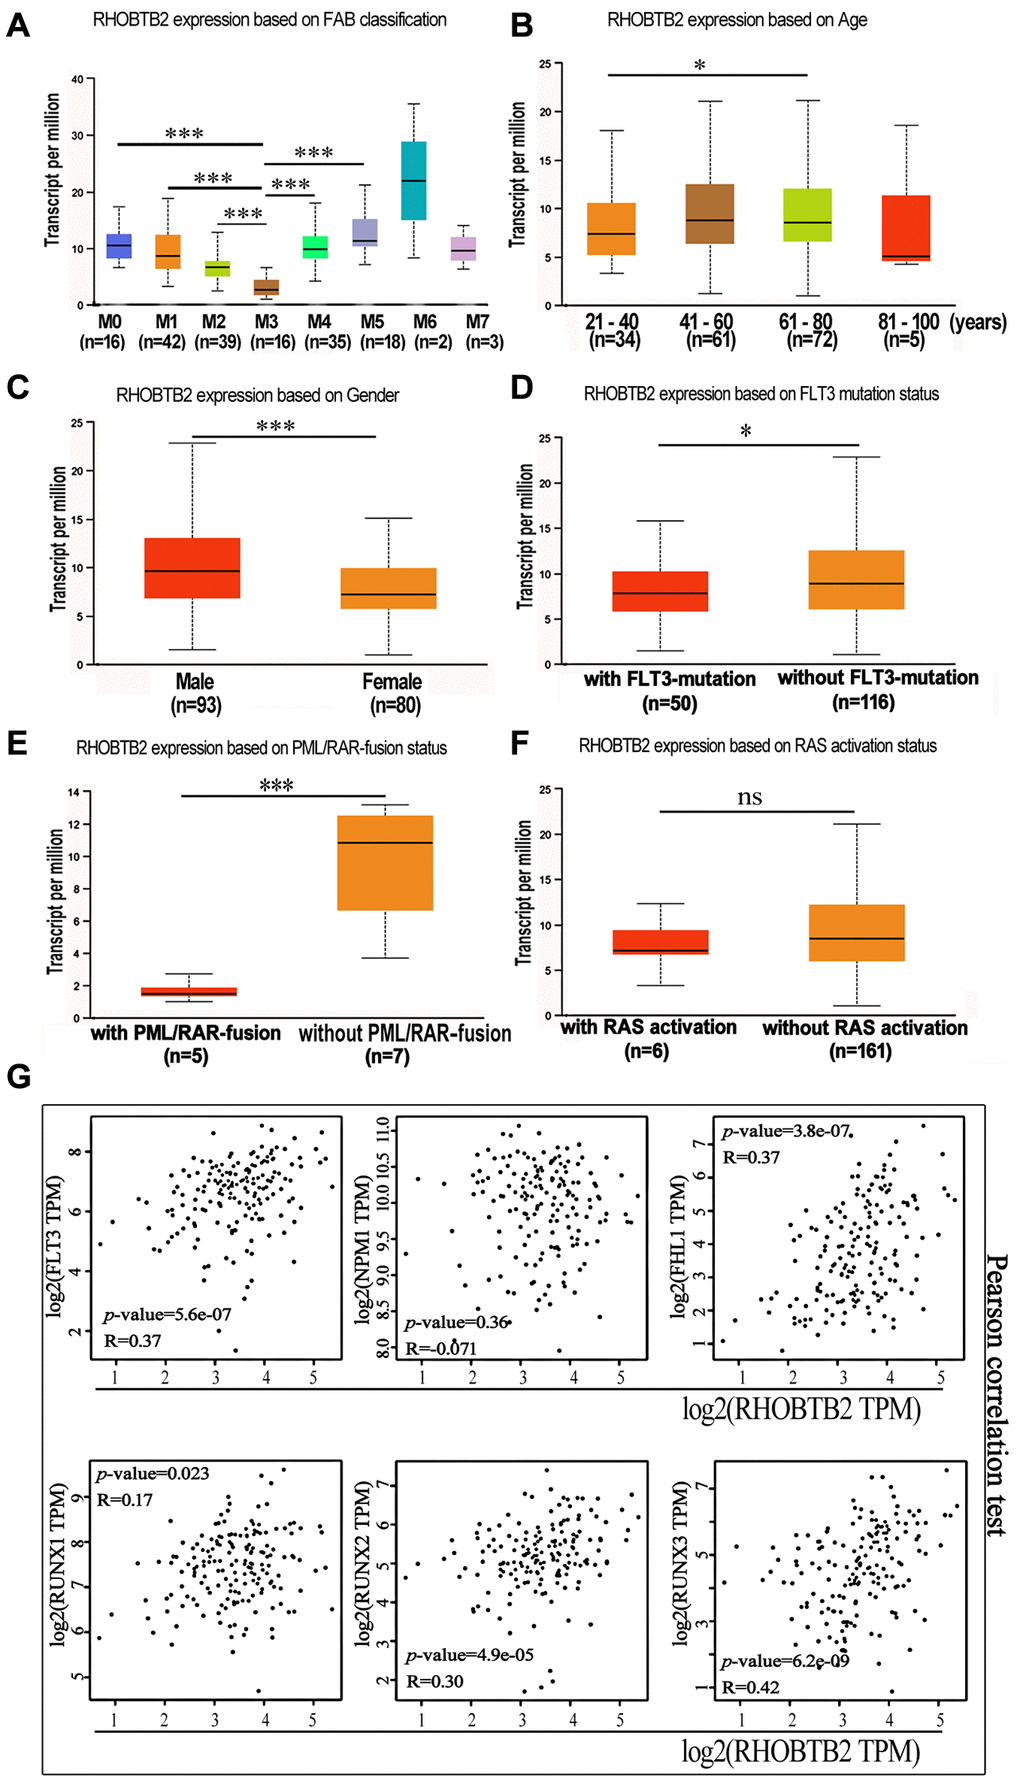 The mRNA expression levels of RHOBTB2 in various classes of AML (UALCAN) and the correlations between RHOBTB2 and disease-related genes in the TCGA-LAML cohort (GEPIA2). (A) Box plots representing RHOBTB2 expression levels in different French–American–British (FAB) subtypes. (B–F) Box plots representing RHOBTB2 expression levels in subgroups based on age (B), gender (C), FLT3 mutation (D), PML/RAR-fusion (E), and RAS activation status (F). (G) The scatter plots show the correlation between RHOBTB2 and disease-related genes such as FLT3, NPM1, FHL1, and RUNX1-3 according to Pearson’s correlation analysis (GEPIA2). A non-log scale of mRNA expression levels was used for calculation and a log2-scale axis was used for visualization. R values indicate correlation coefficients. A P-value *P **P ***P 